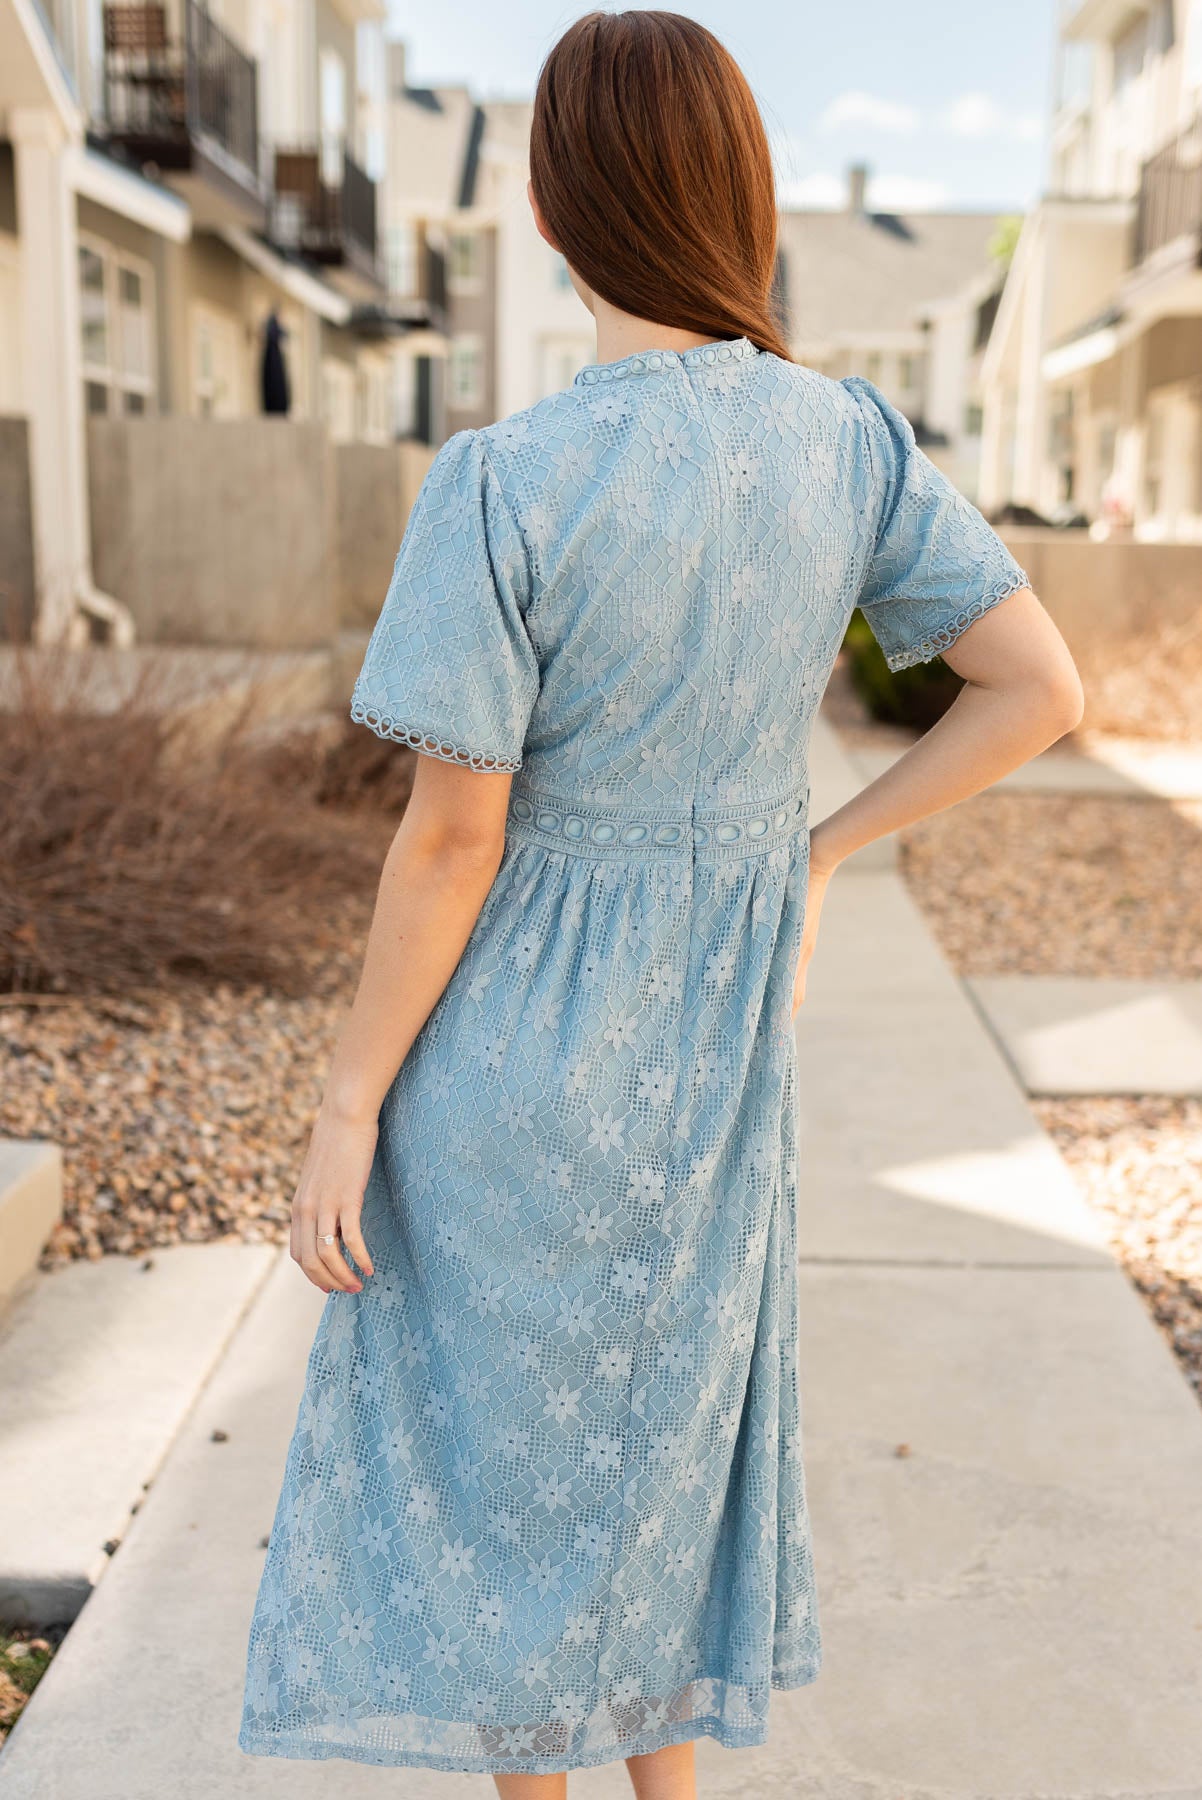 Back view of the dusty blue corded lace dress